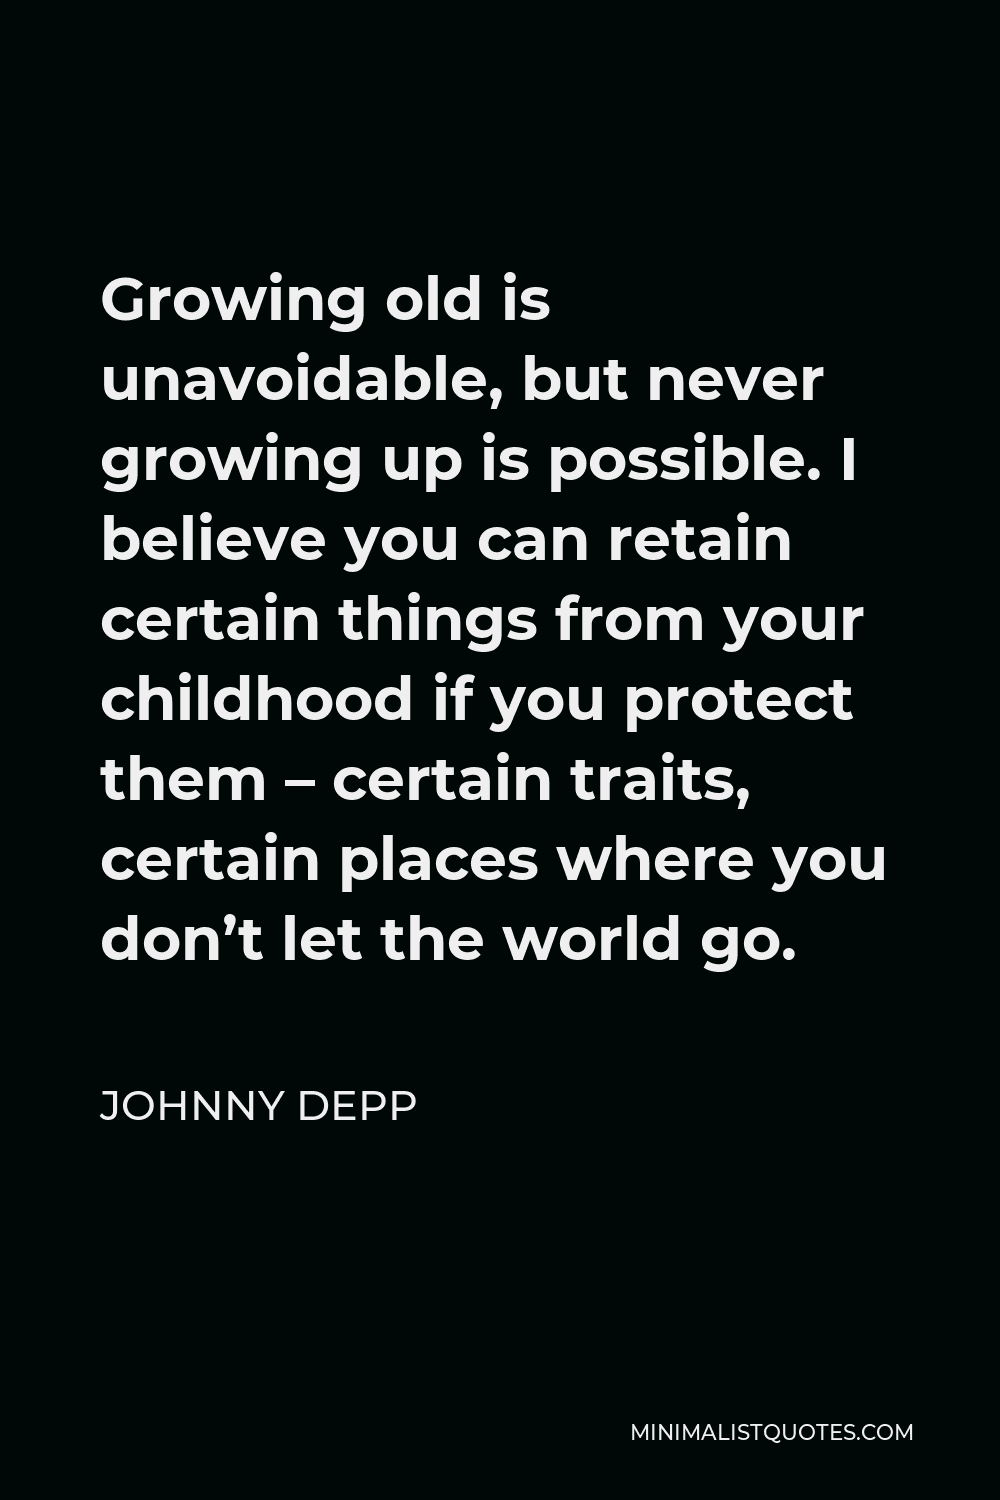 Johnny Depp Quote - Growing old is unavoidable, but never growing up is possible. I believe you can retain certain things from your childhood if you protect them – certain traits, certain places where you don’t let the world go.